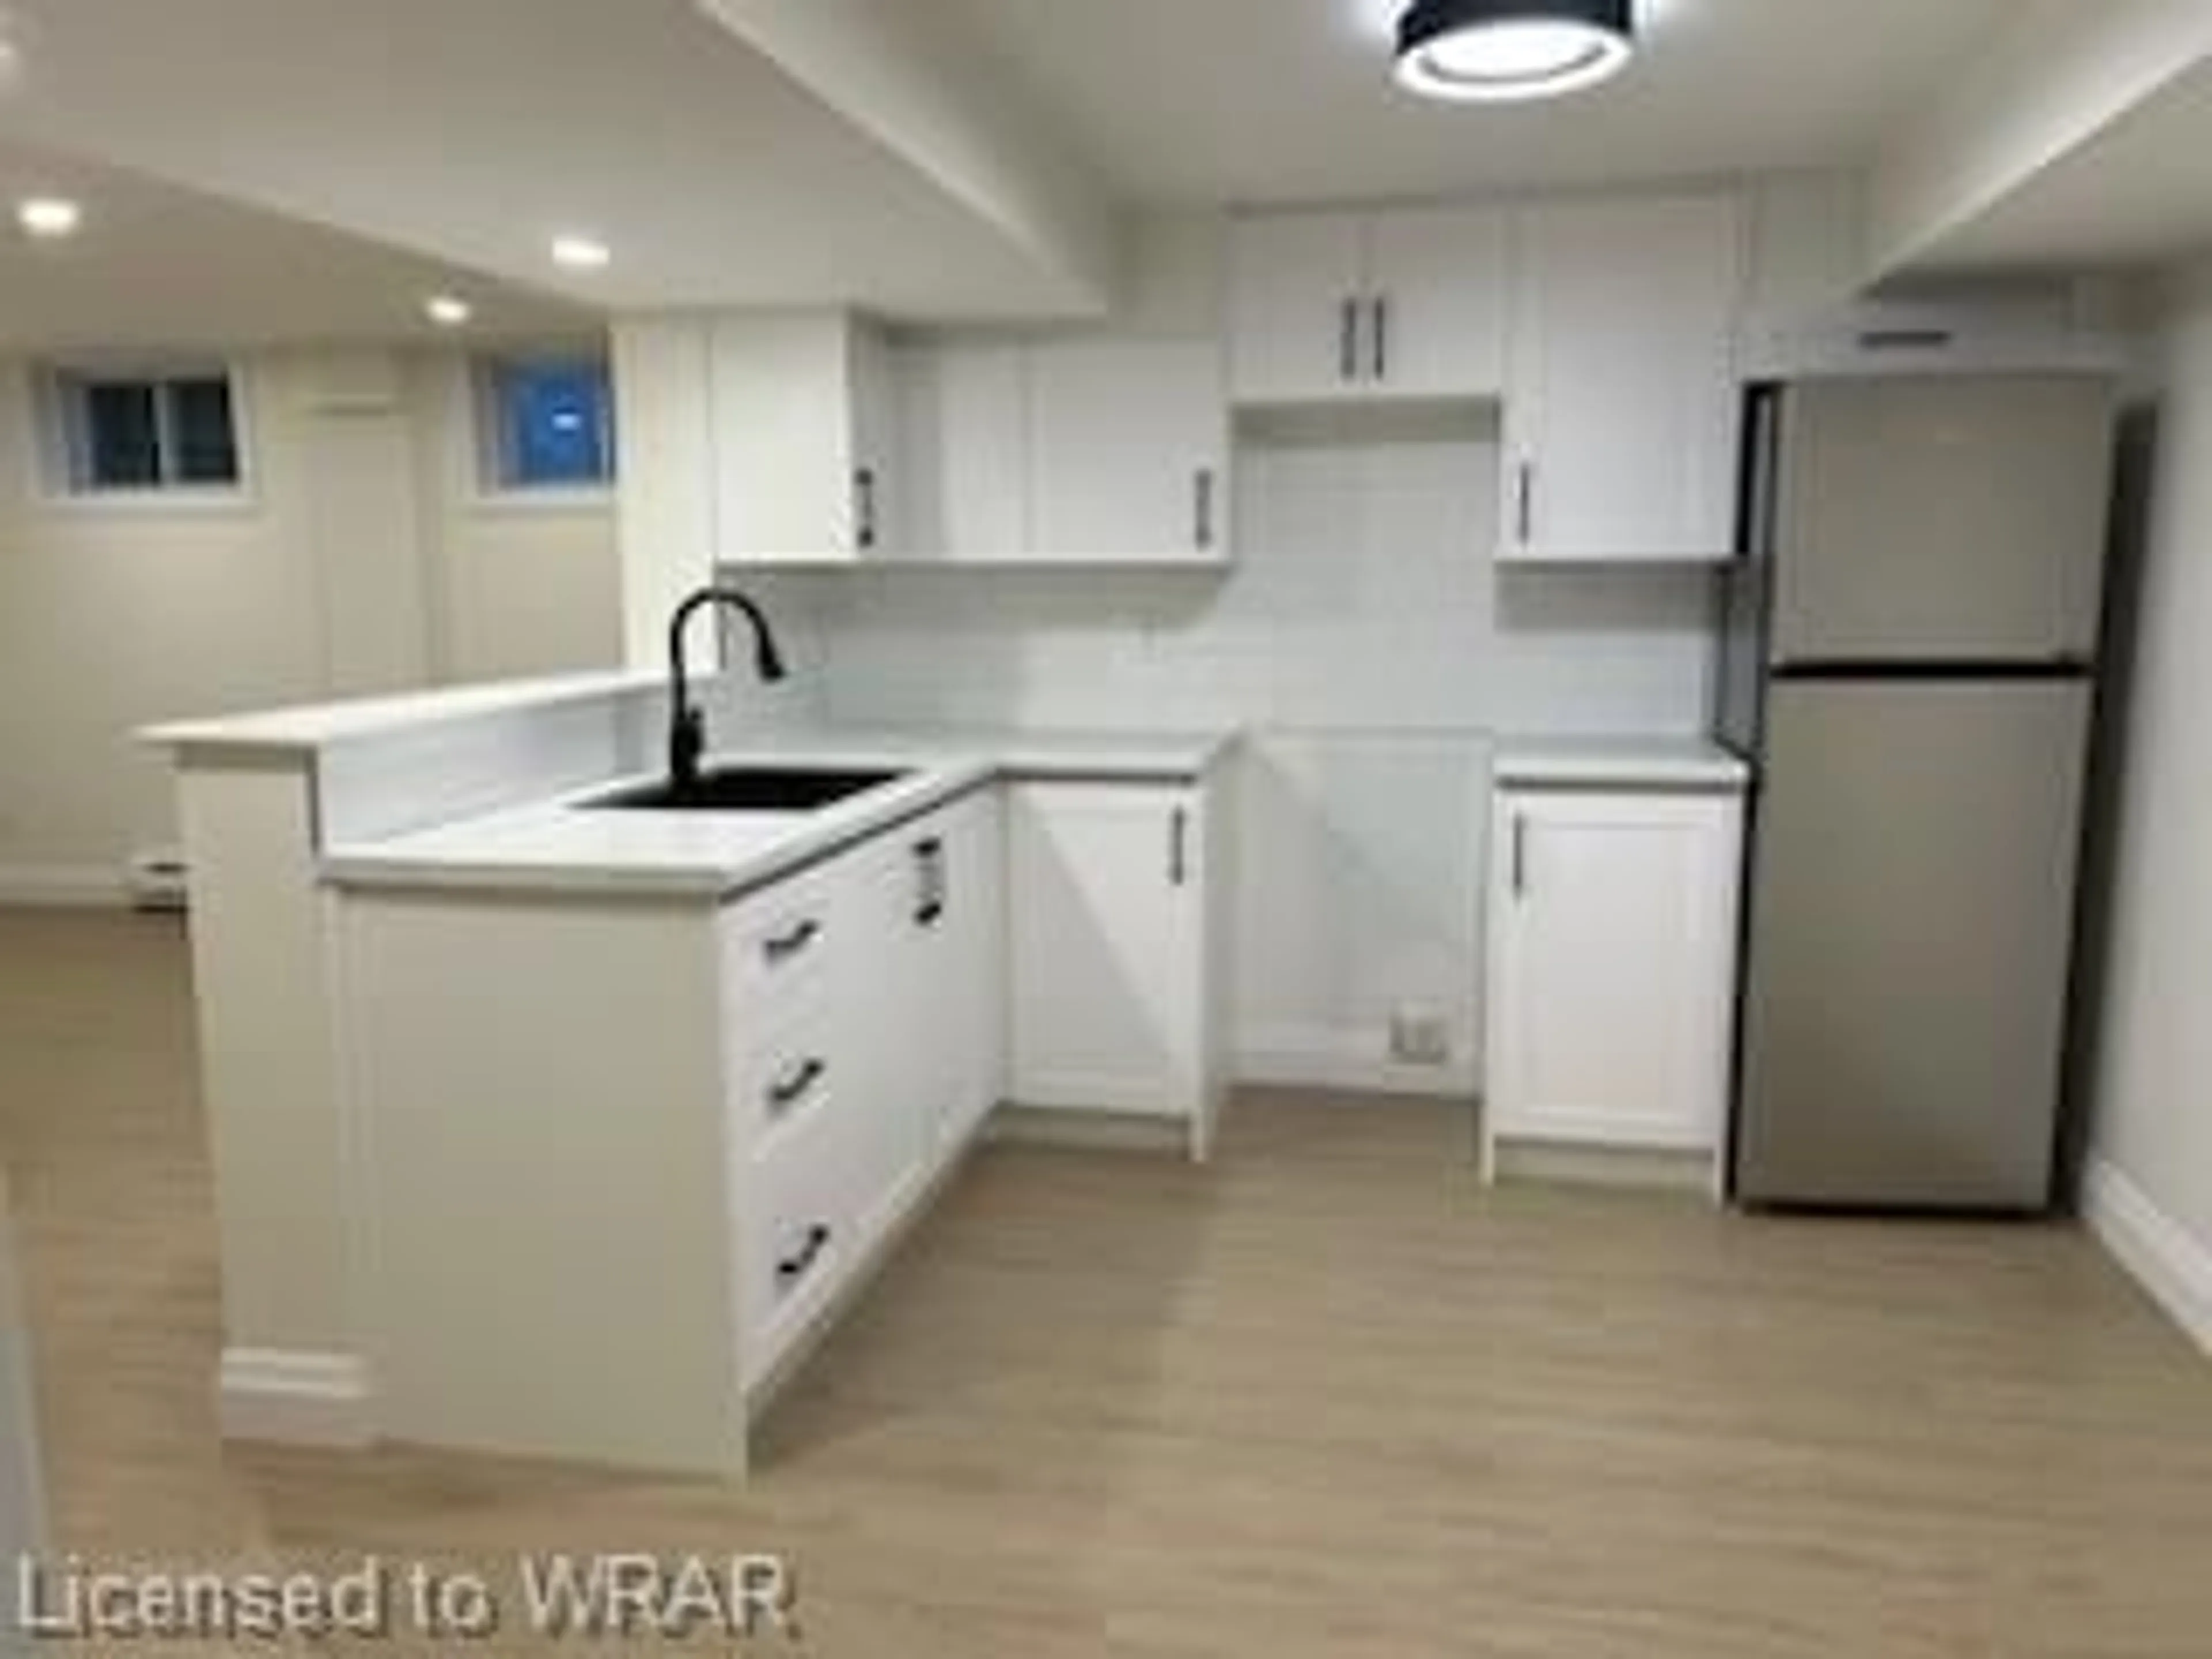 Standard kitchen for 137 Concession St, Cambridge Ontario N1R 2H5